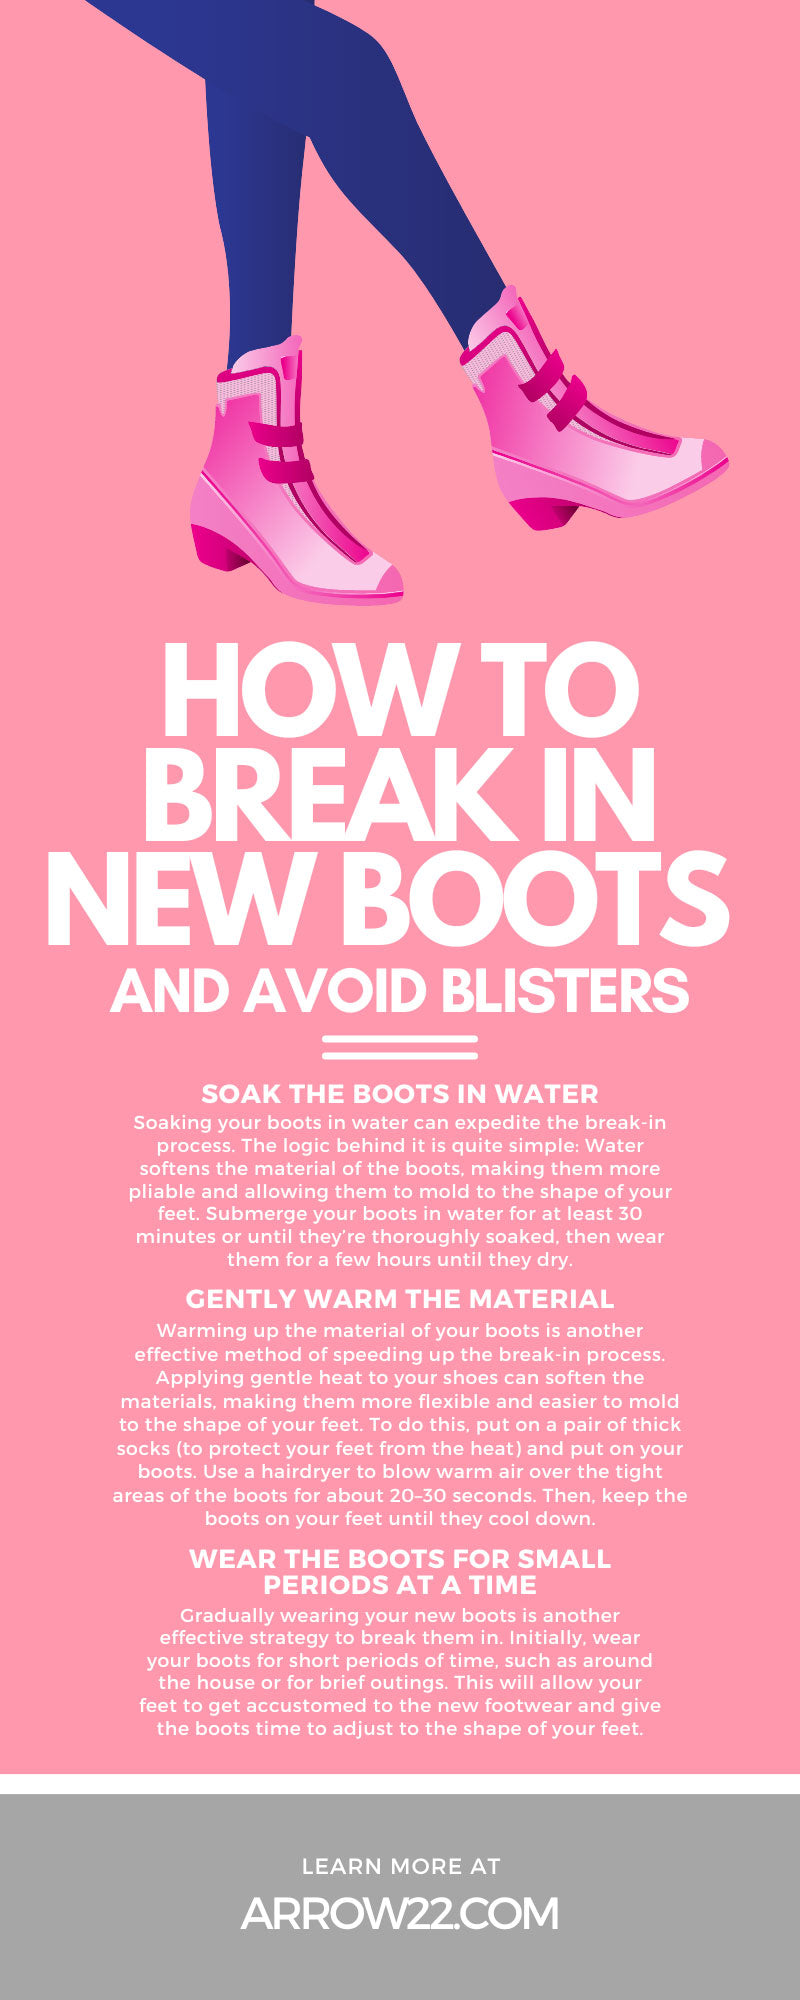 How To Break In New Boots and Avoid Blisters